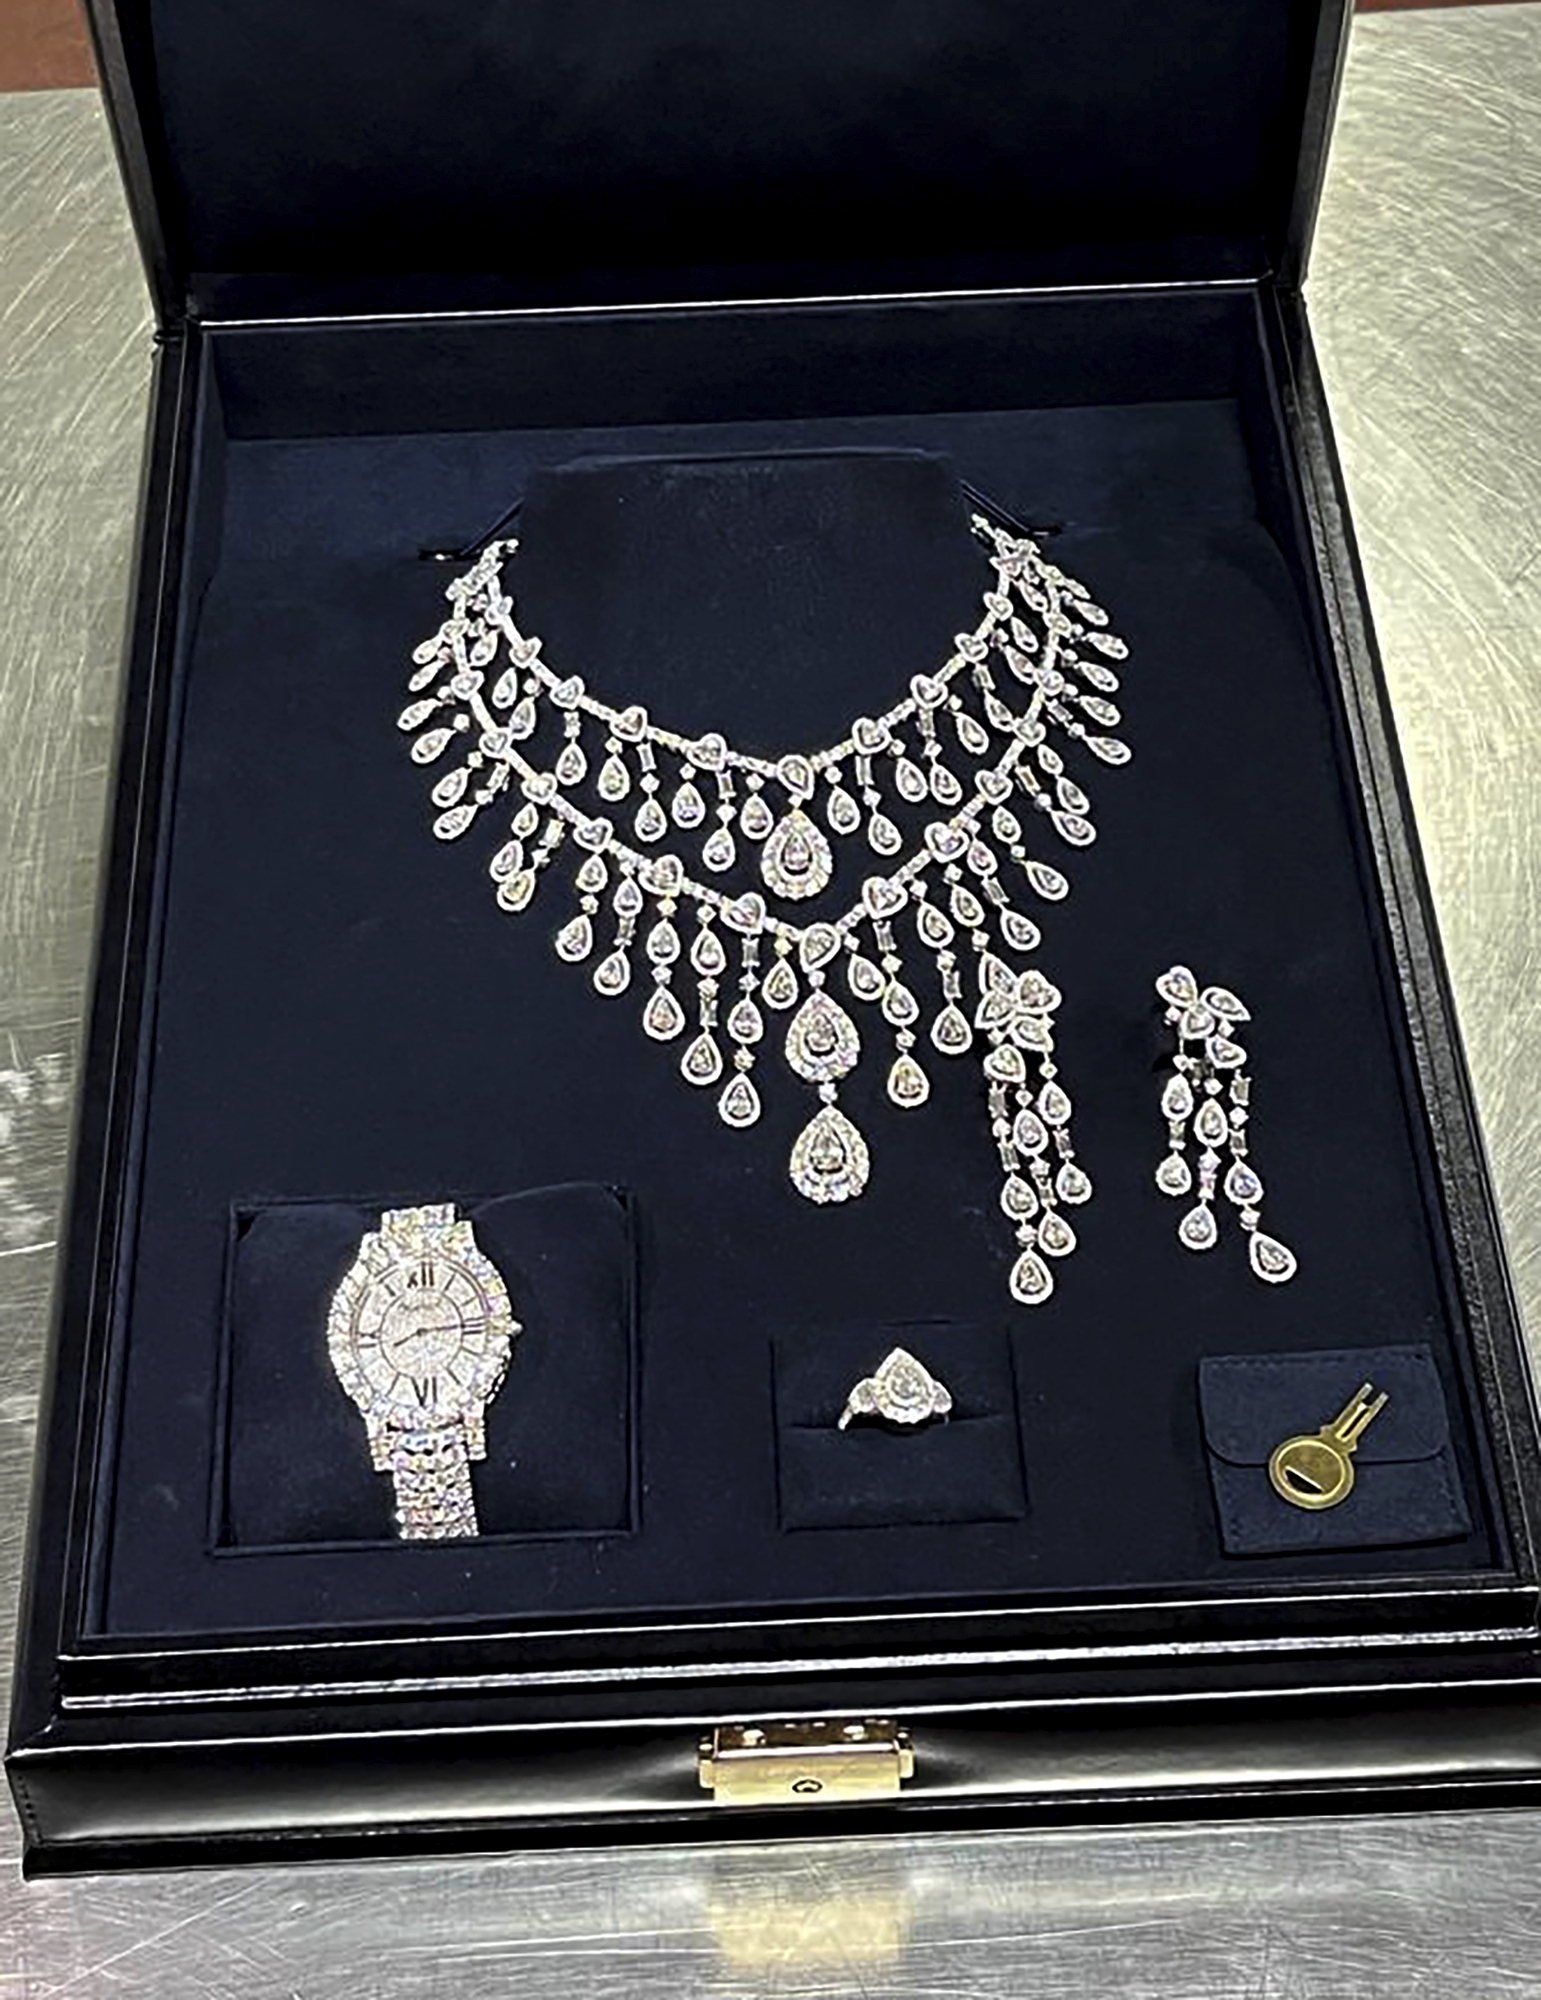 FILE - This photo provided by Brazil's Federal Revenue Department shows jewelry, part of an investigation into gifts received by ex-President Jair Bolsonaro during his term, seized by customs authorities at Guarulhos International Airport in Sao Paulo, Brazil, the week of March 24, 2023. Brazilian police indicted Bolsonaro on Thursday, July 4, 2024, for money laundering and criminal association, sources say. (Brazil's Federal Revenue Department via AP, File)